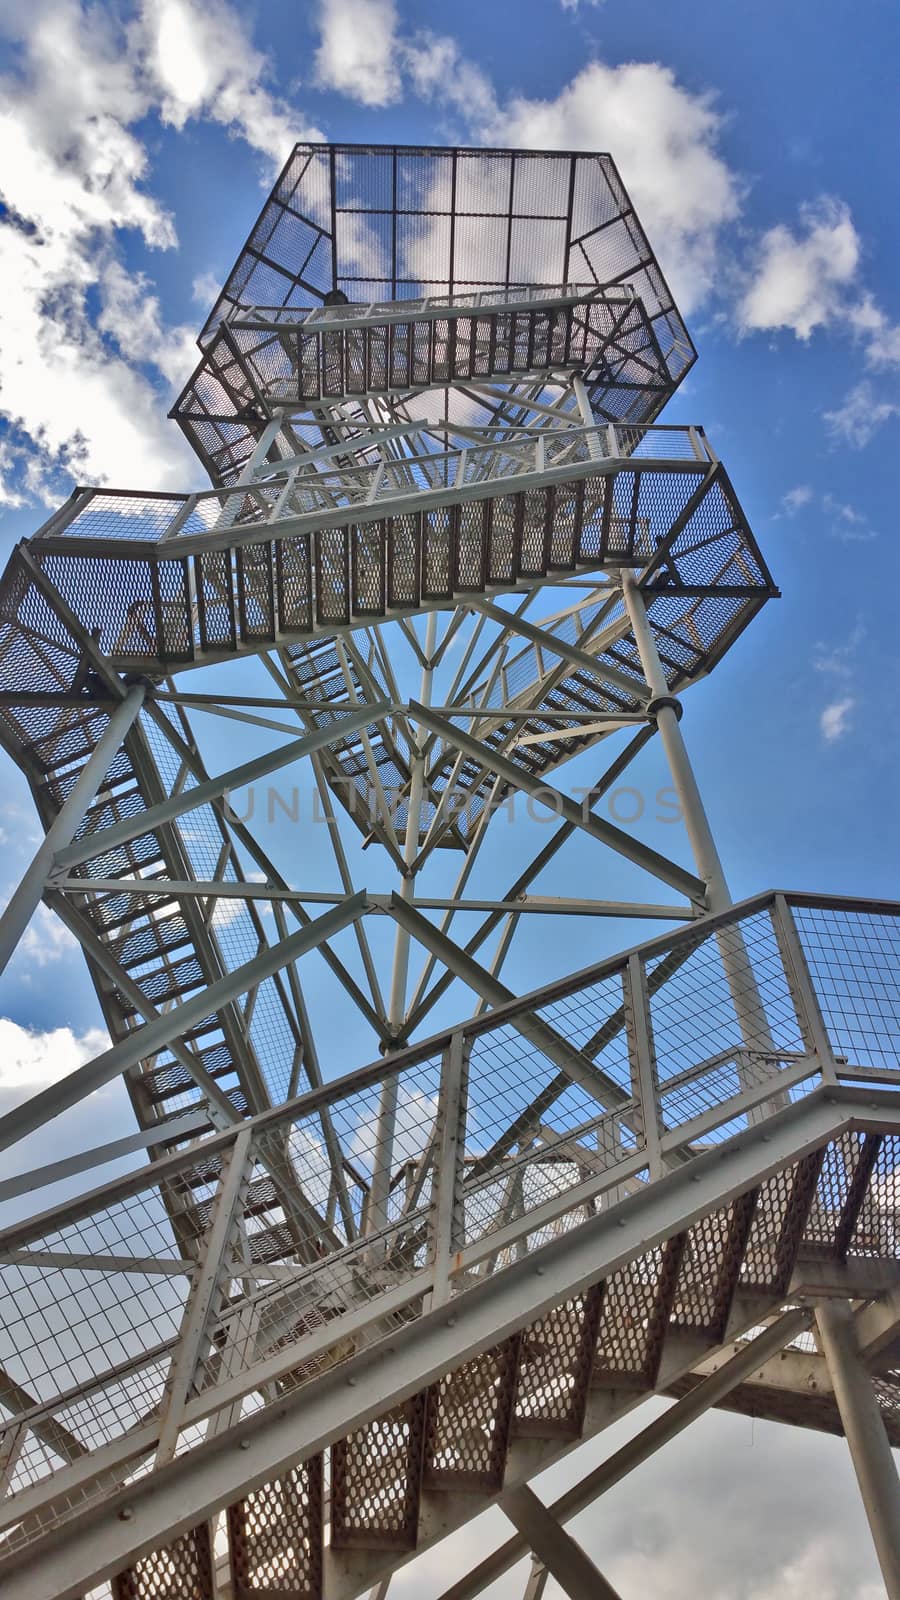 View from below through the metal grill on the tower